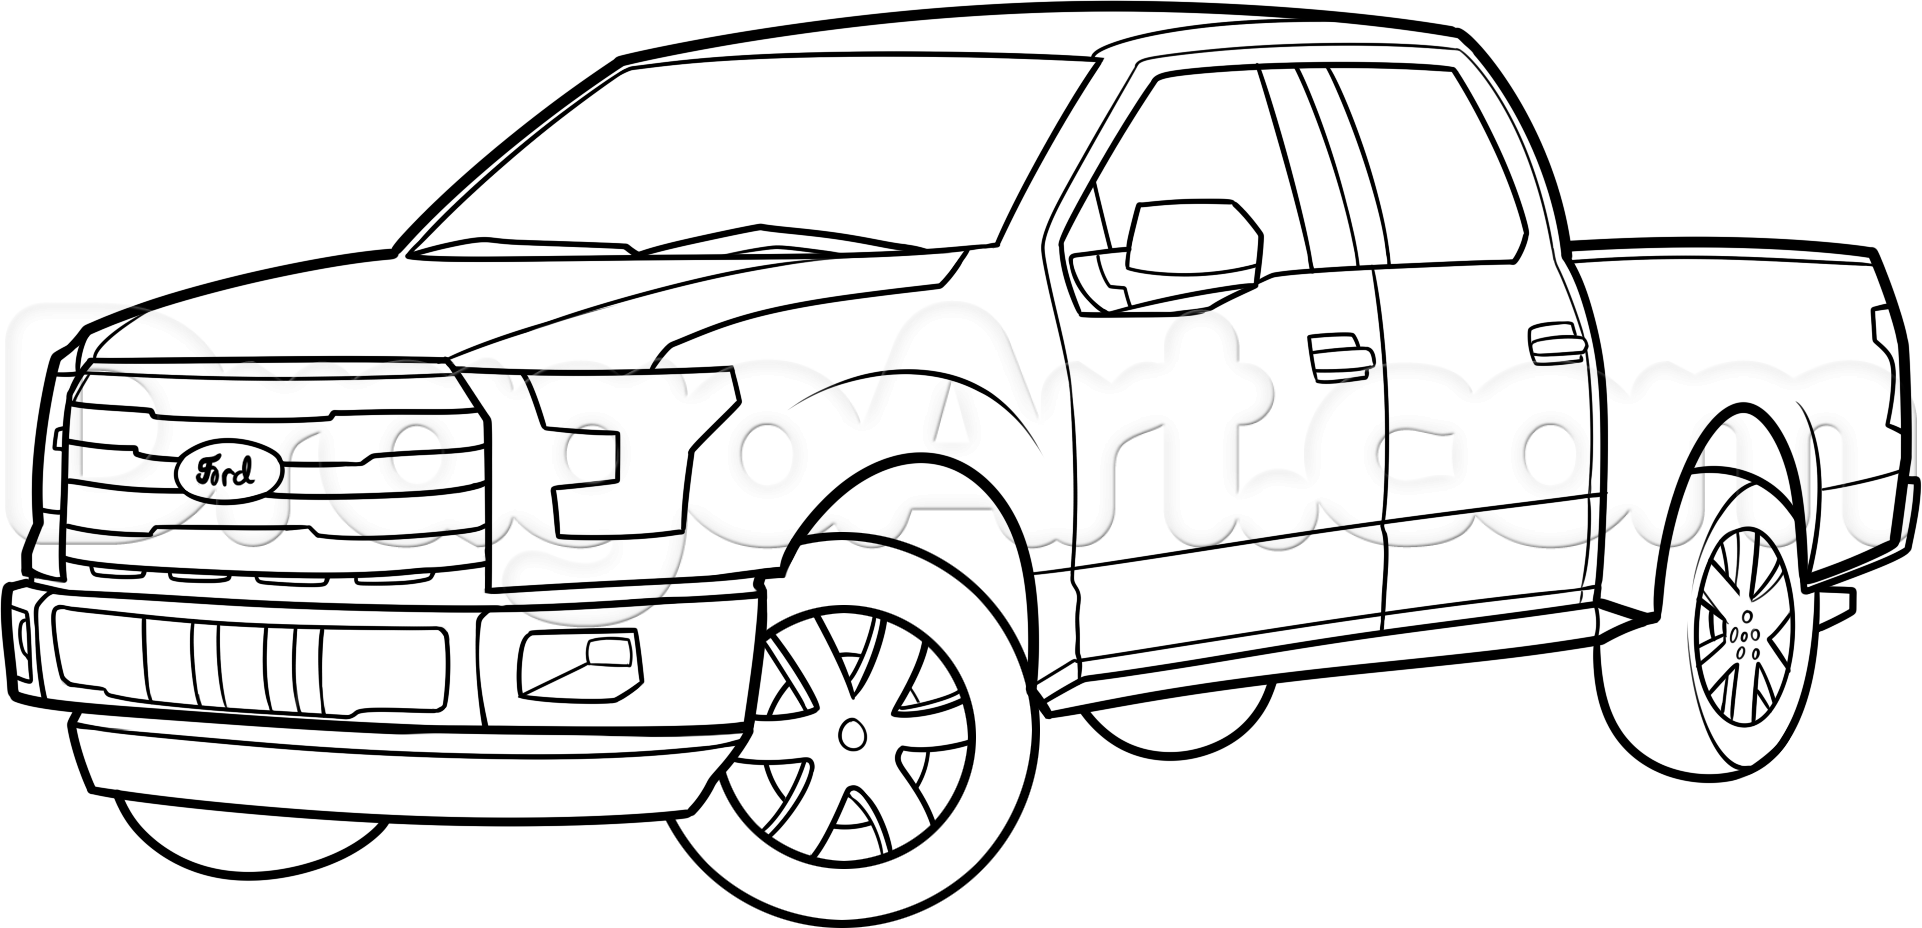 how-to-draw-an-f-150-ford-pickup-truck-step-11_1_000000175271_5